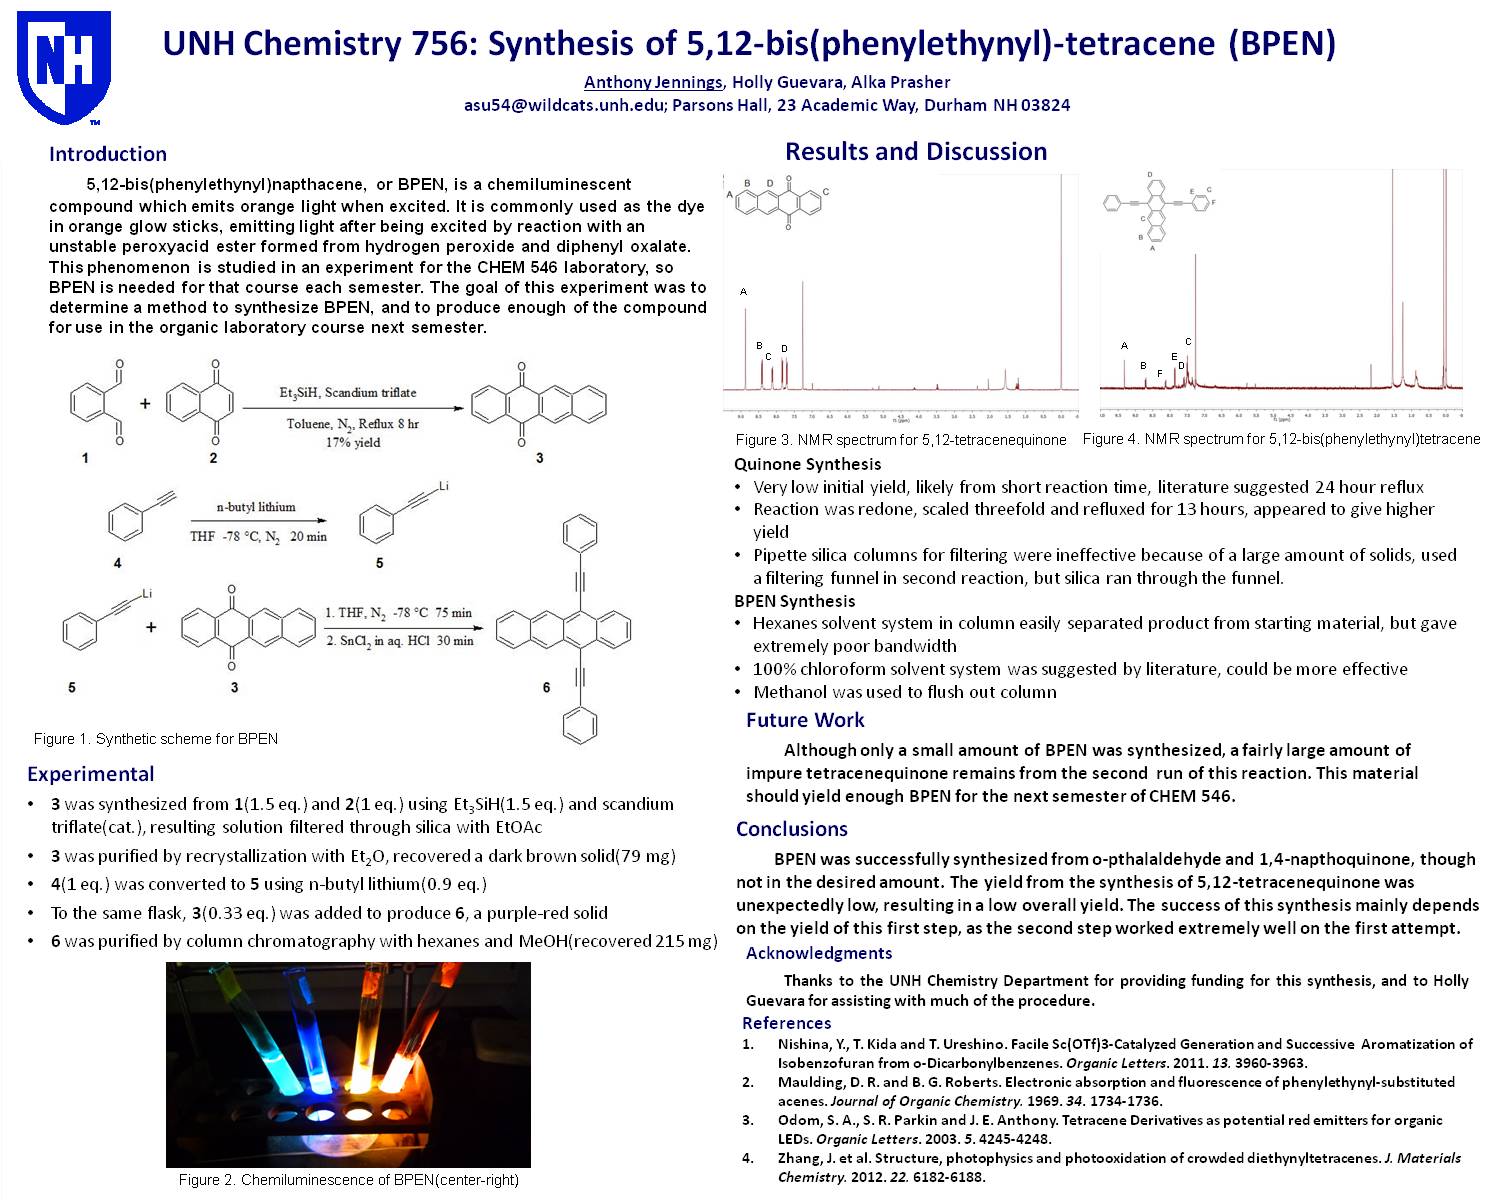 Chem 756: Synthesis Of Bpen by asu54